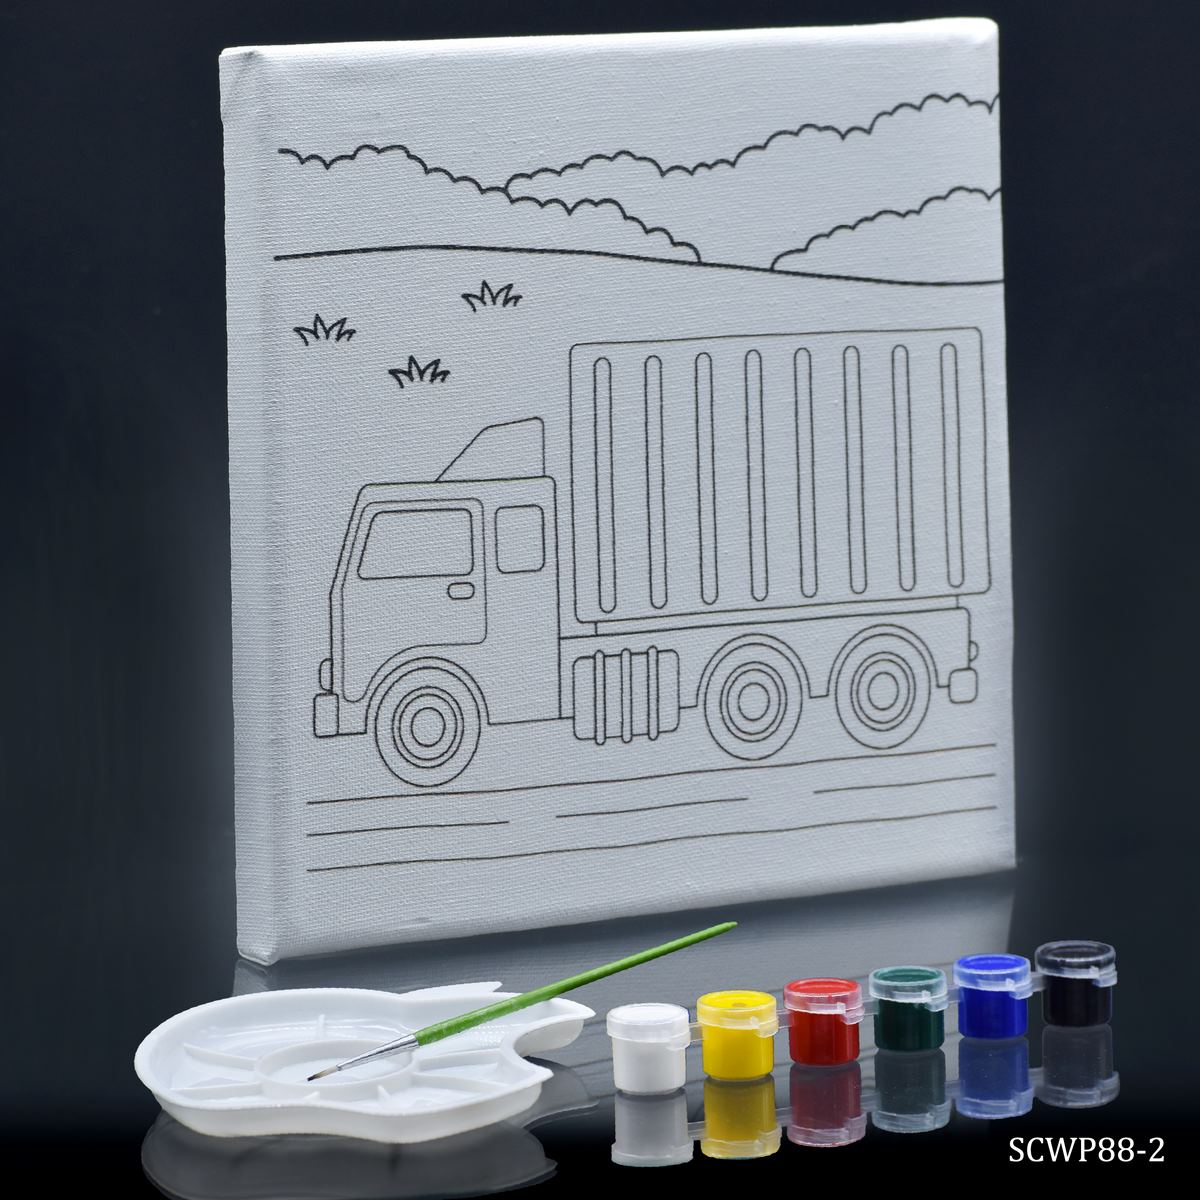 jags-mumbai Canvas DIY Painting Kit: Stretched Canvas with Pre-drawn Pictures and Free Colors 8x8 Inches